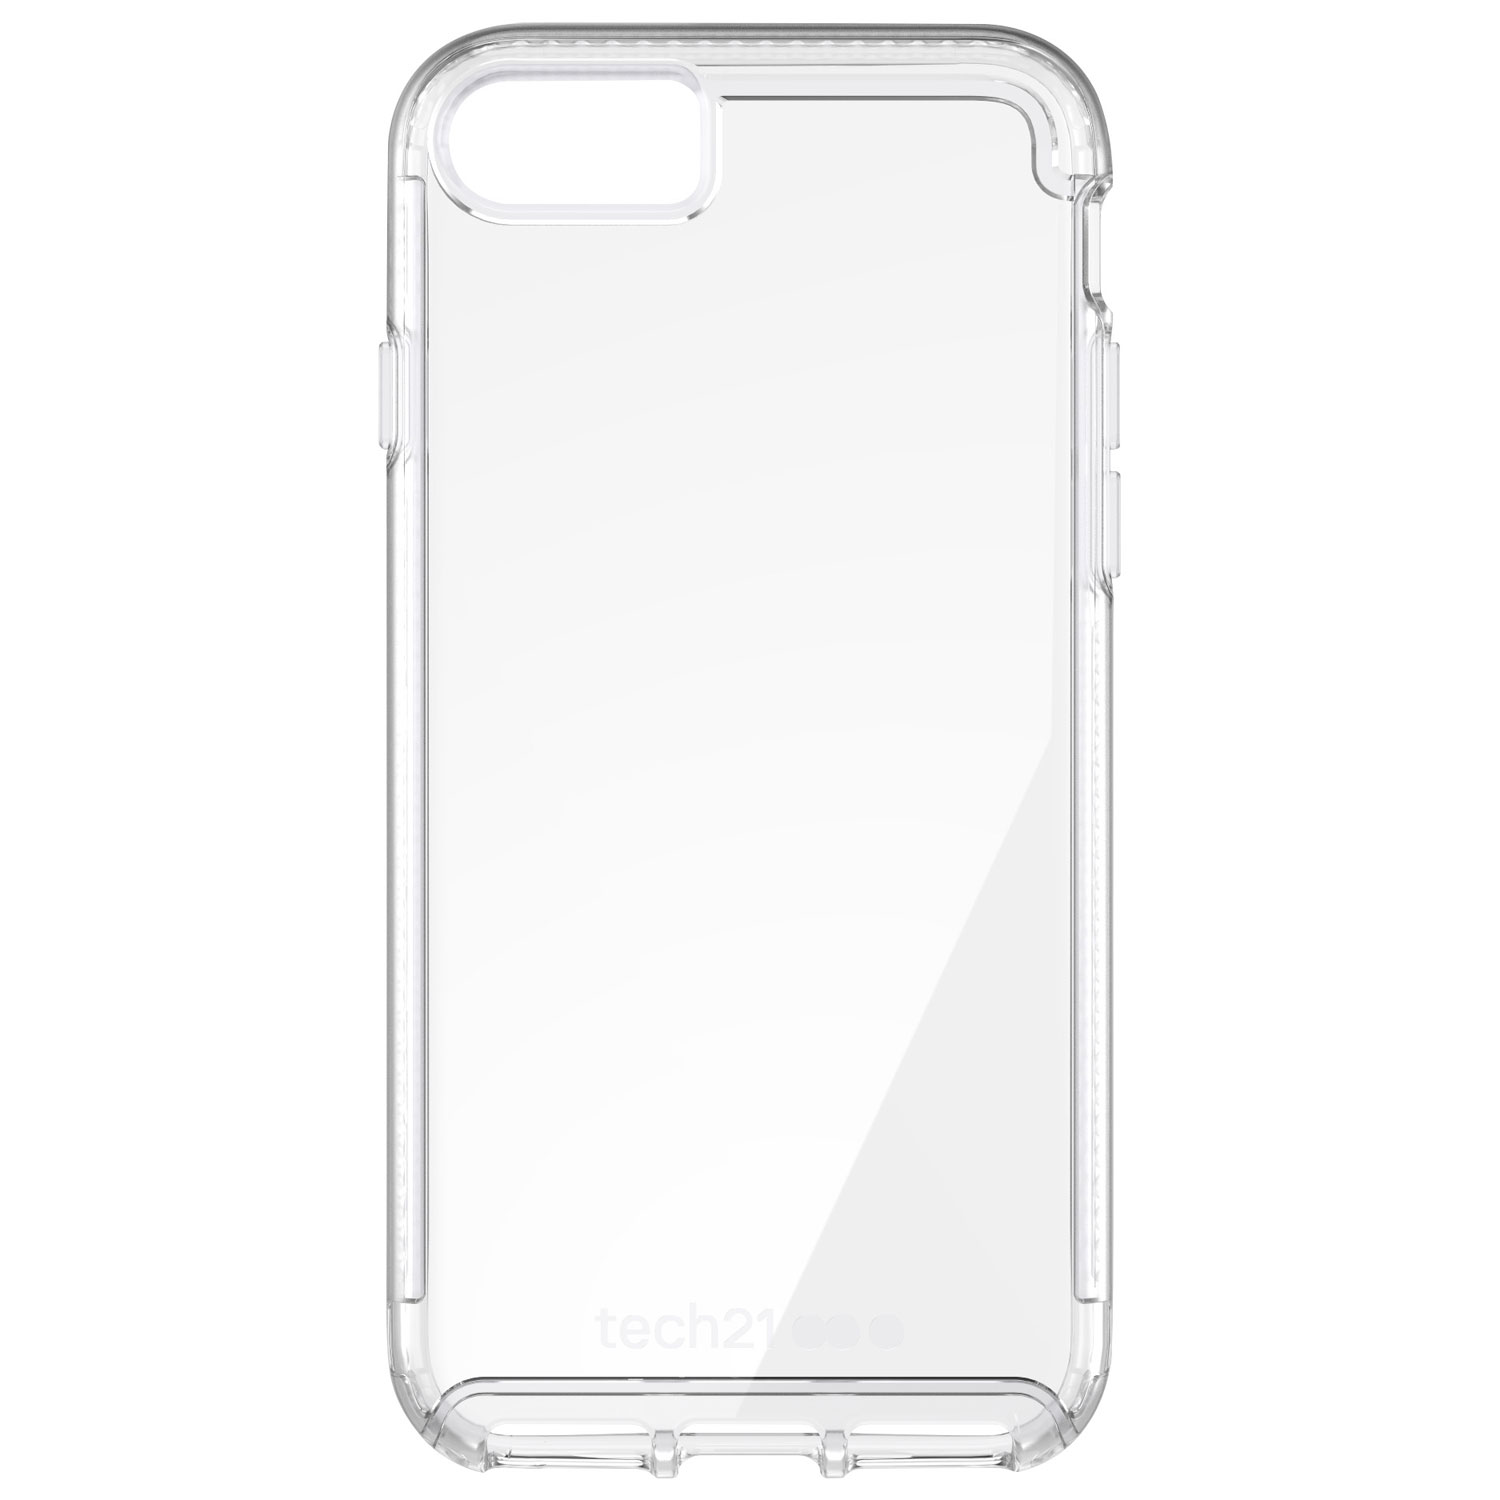 tech21 Pure Skin Case for iPhone SE (3rd/2nd Gen)/8/7 - Clear